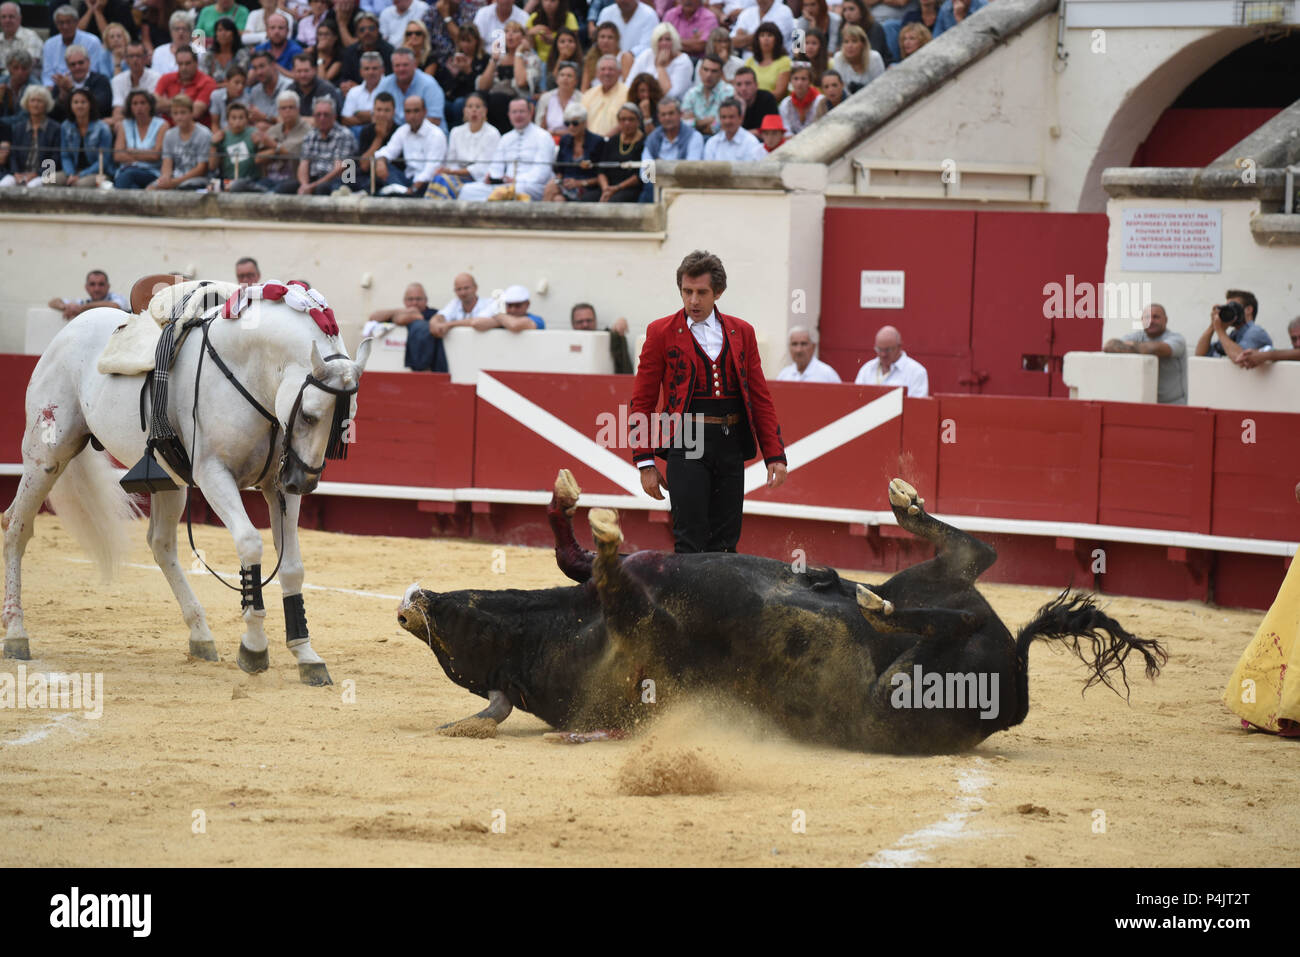 August 13, 2015 - Beziers, France: Spanish 'rejoneador' Pablo Hermoso de Mendoza, one of the most famous bullfighters on horseback, performs during a corrida in Beziers. Despite growing opposition from animal right groups, bullfighting remains popular in southern France. Bullfighting aficionados report that the practice is even more genuine in southern France than in neighboring Spain because bullfighting is being organized at a municipal level, by groups of people committed to the tauromachy traditions.  Corrida a cheval organisee dans le cadre de la feria de Beziers. Le maire de Beziers Robe Stock Photo